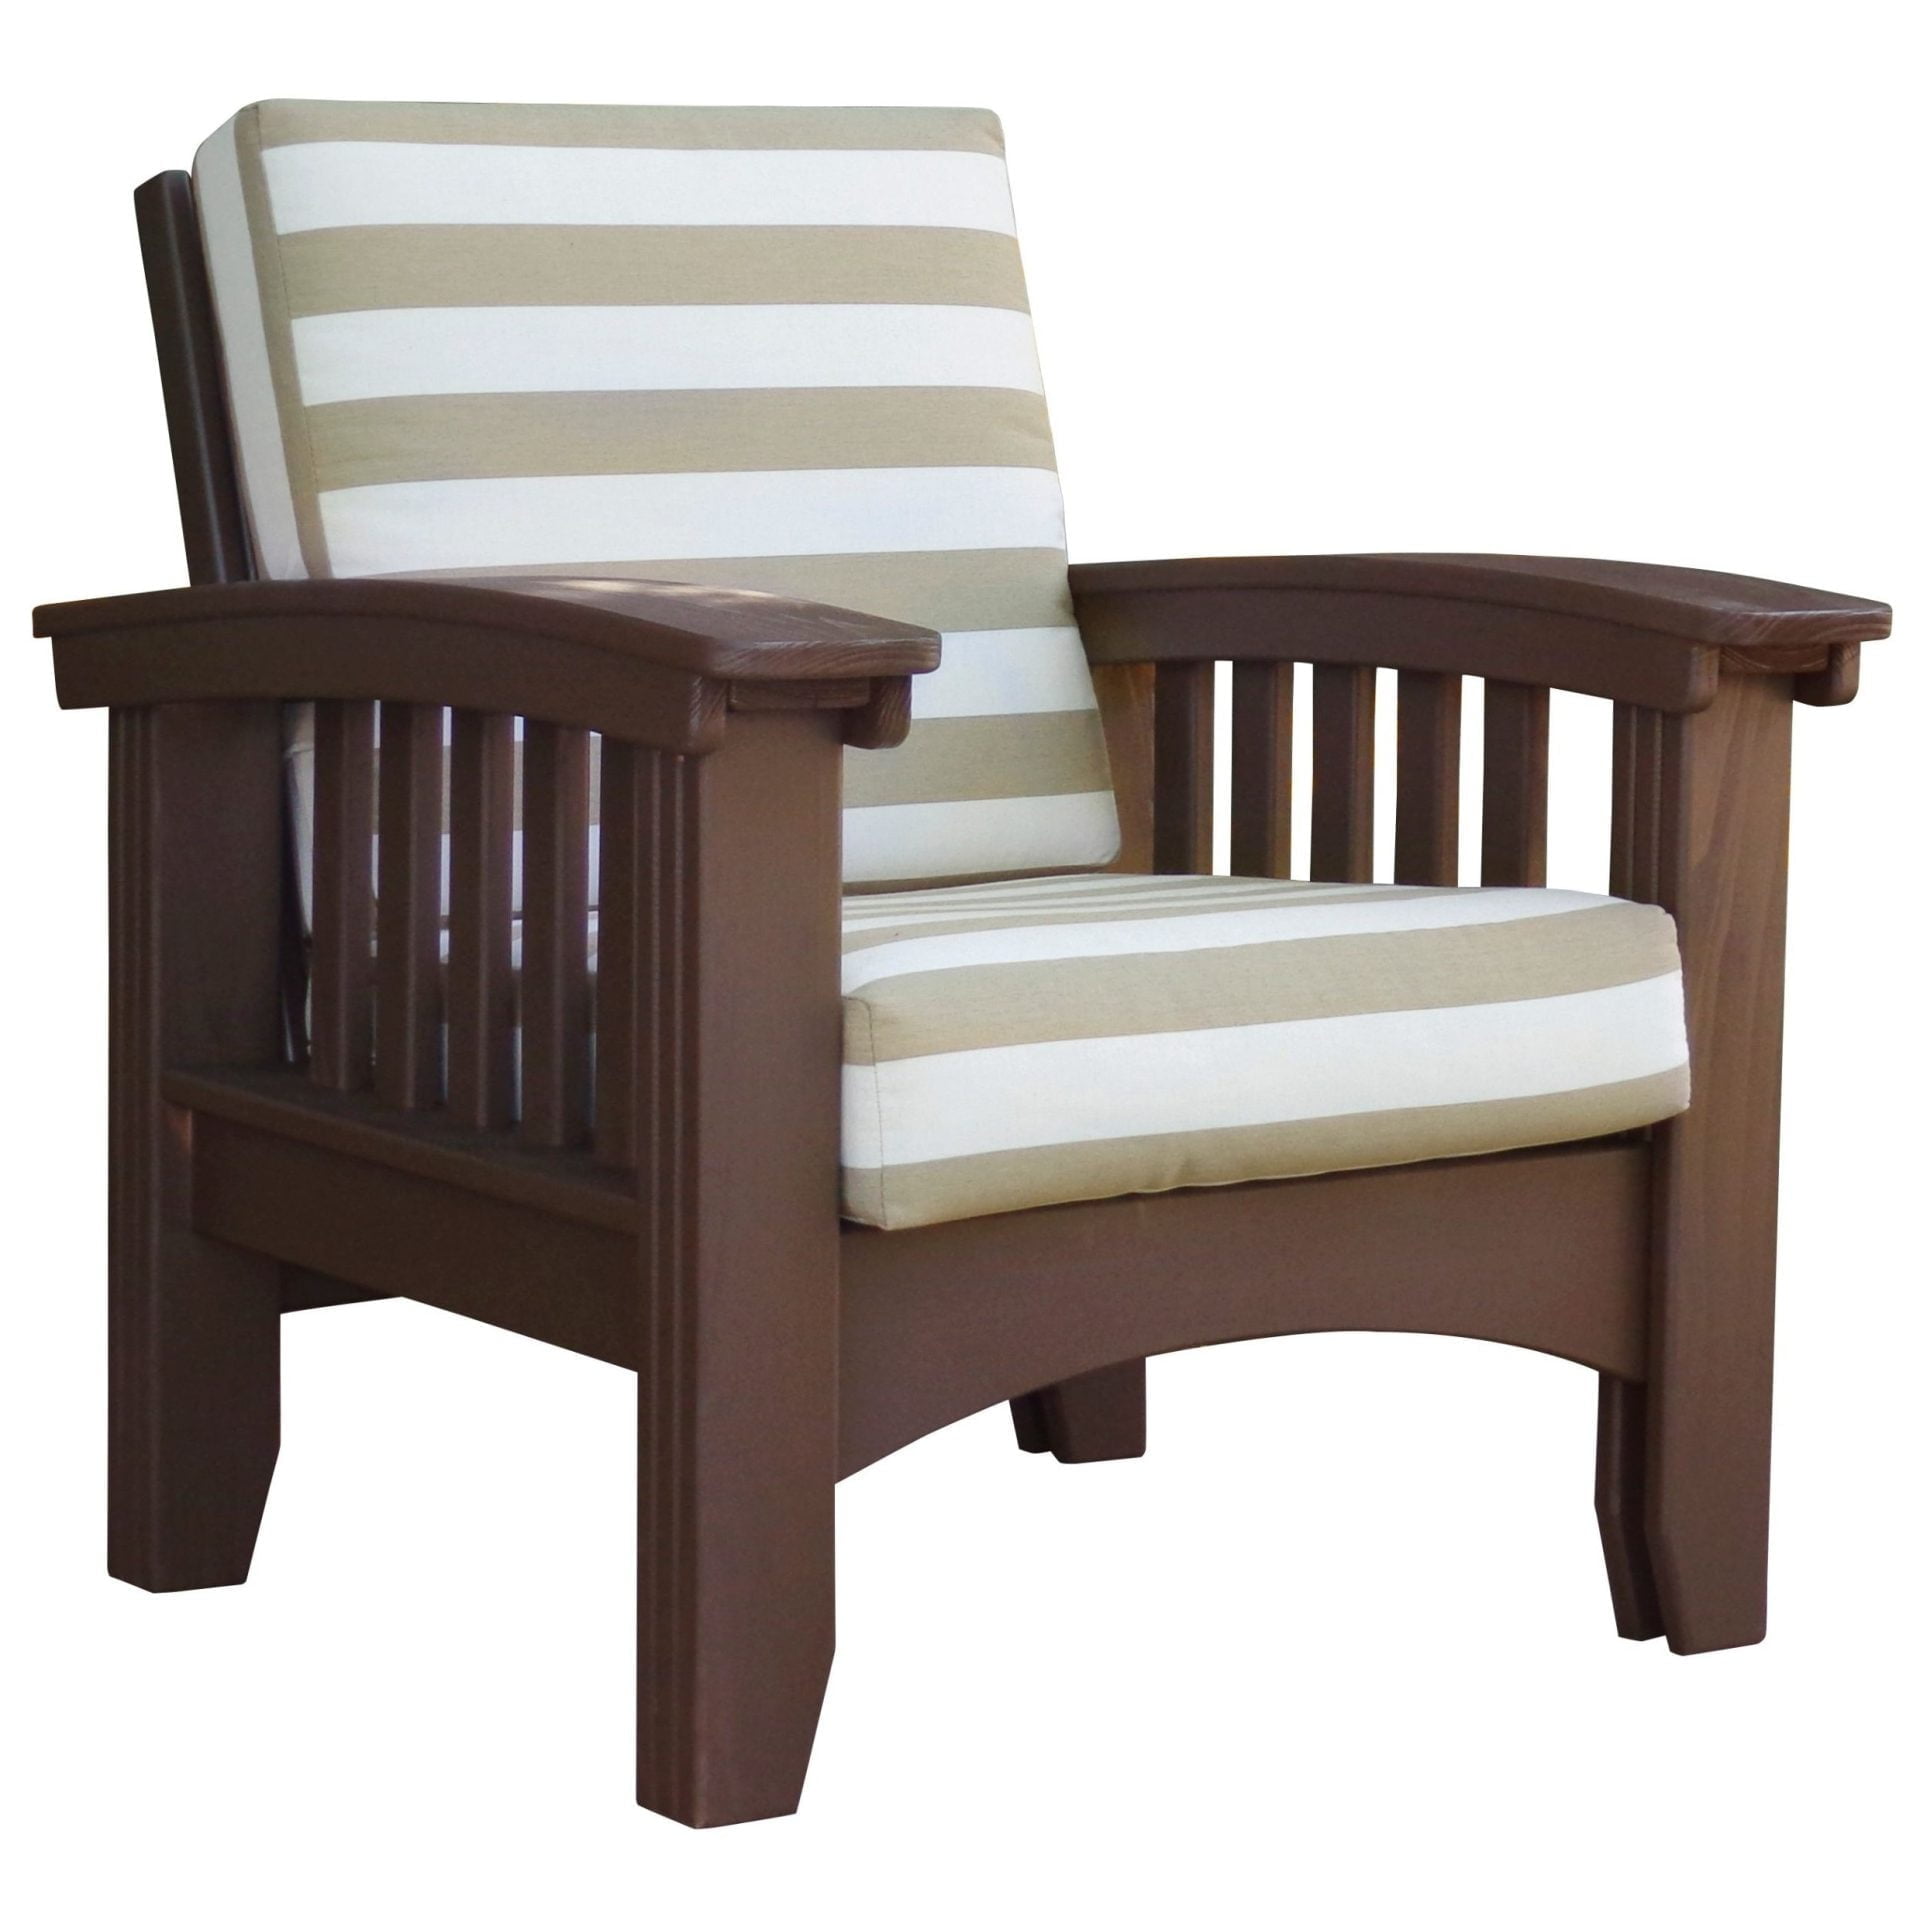 Cypress Mission Style Deep Seat Outdoor Chair